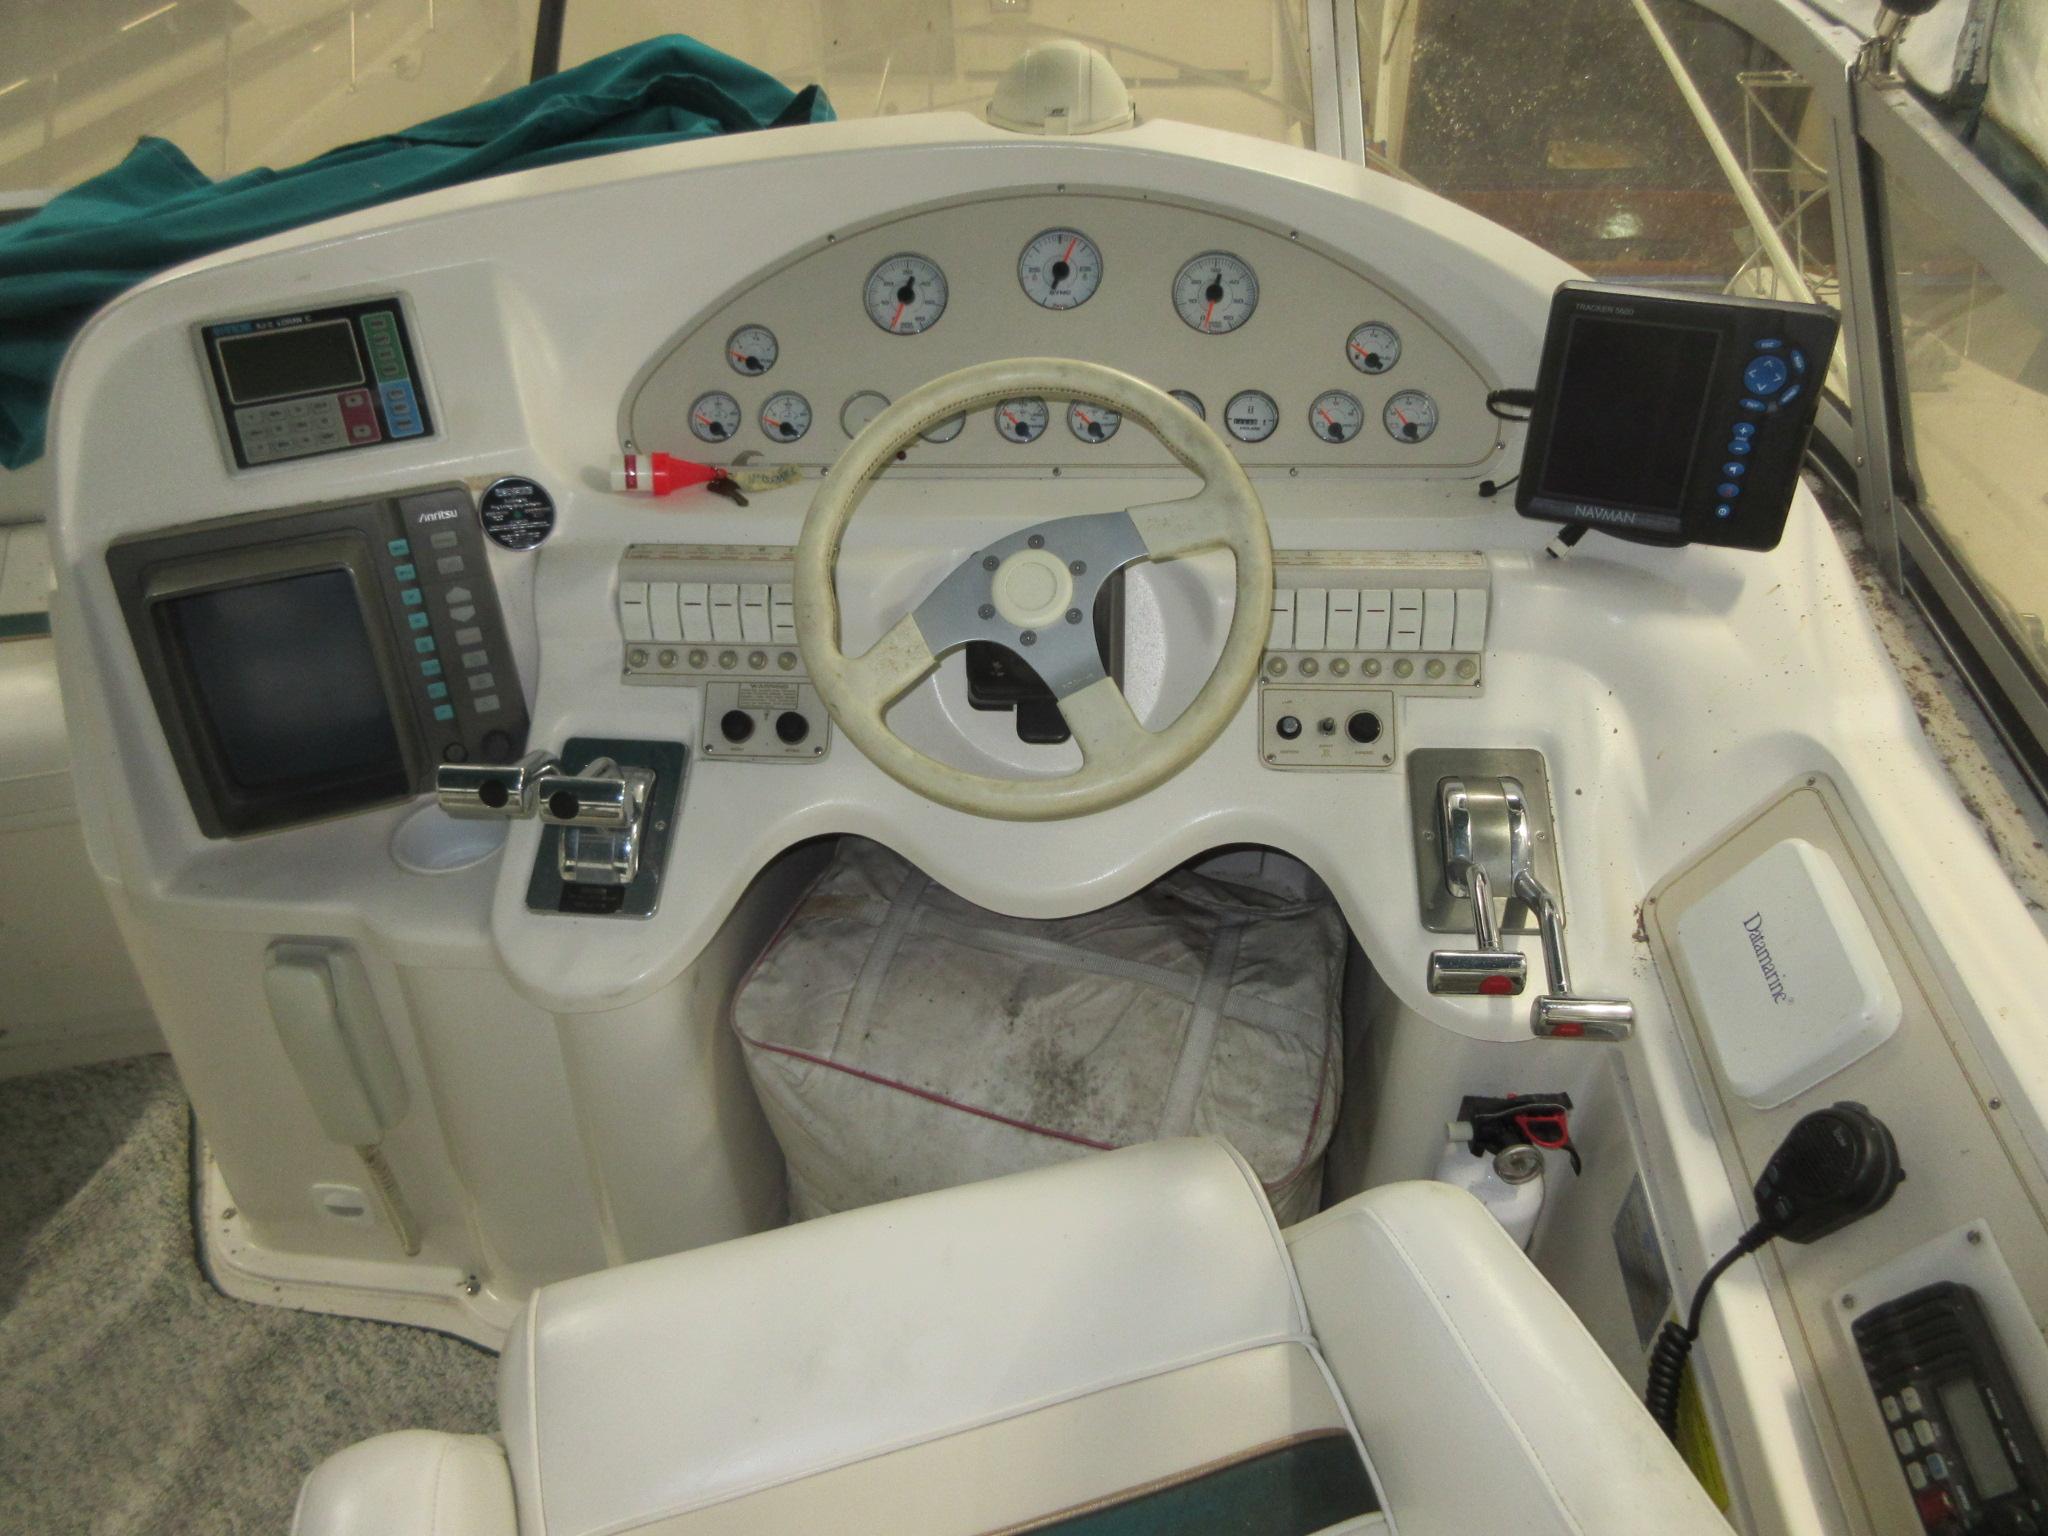 1995 Cruisers Yachts 3650 Aft Cabin